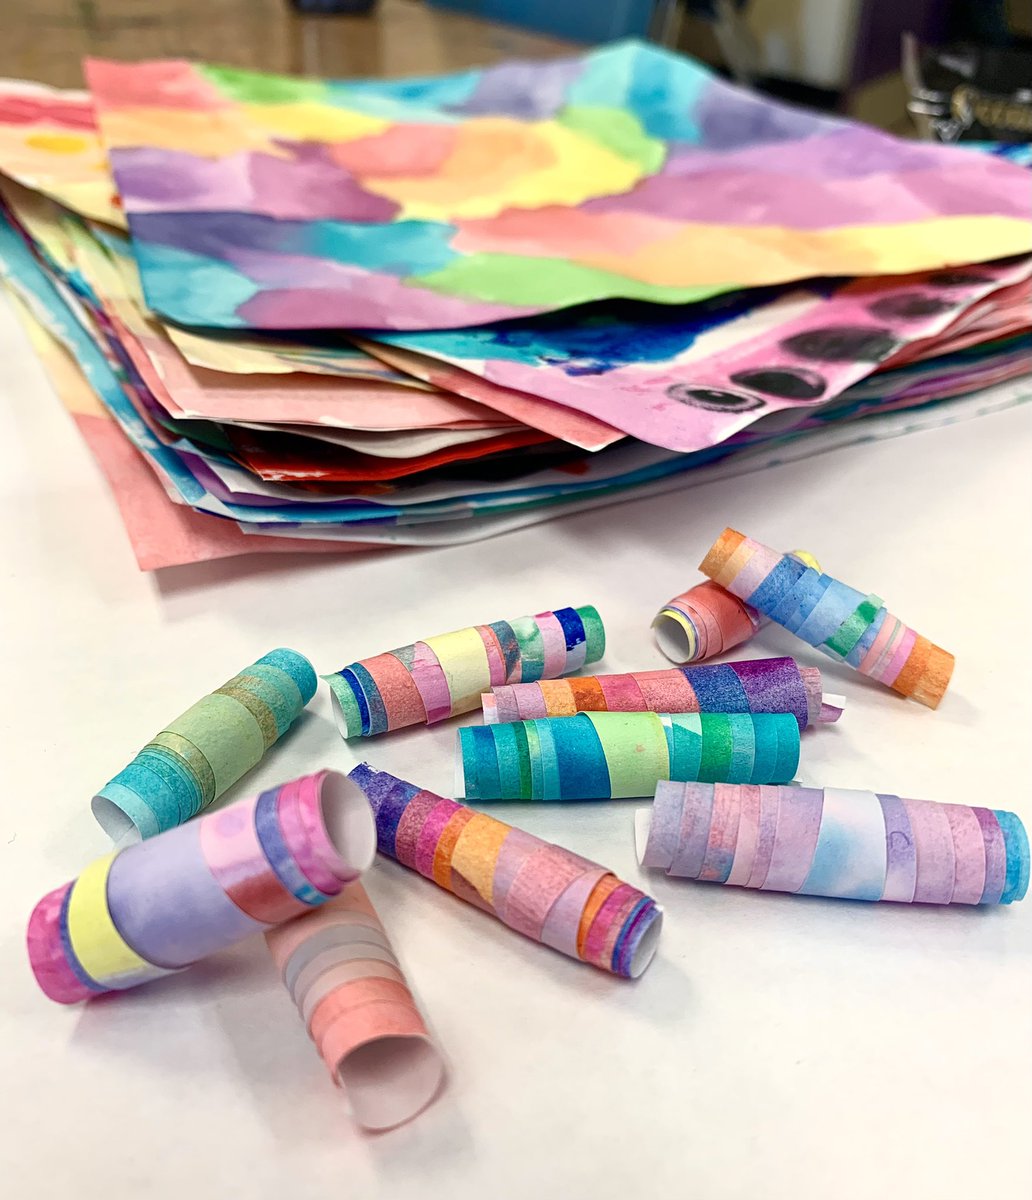 Our painted papers are being rolled into beads this week, as we learn the history of Ugandan paper beads in Grade 2 & 3
#africanheritagemonth #paperbeads